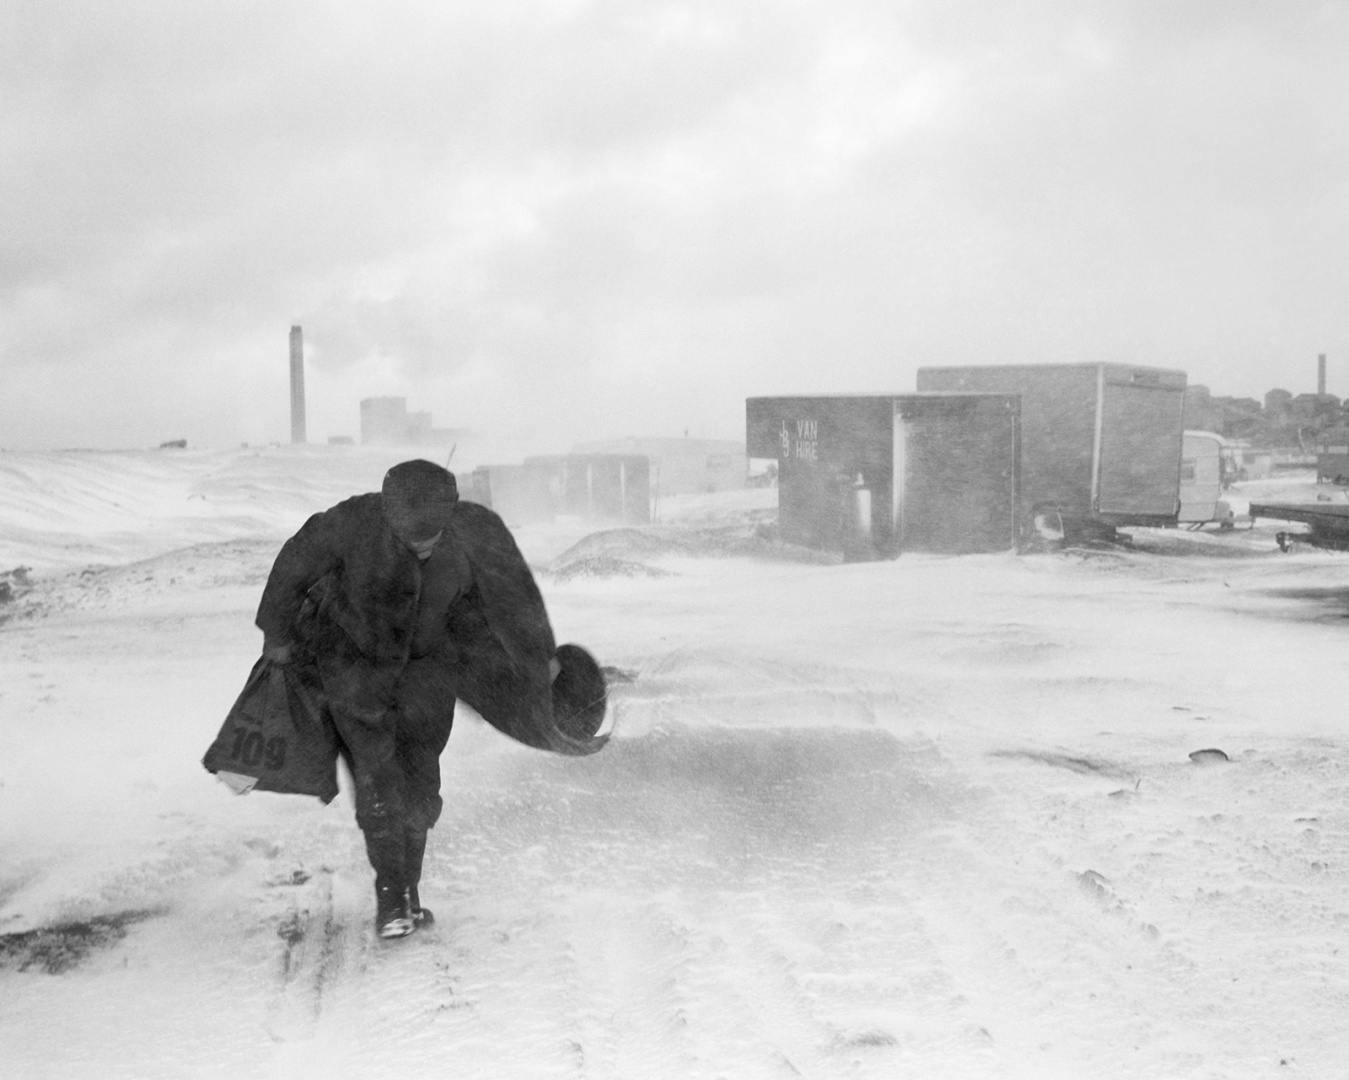 Black and white photograph of a person marching through the snow, which appears in the new Chris Killip exhibition